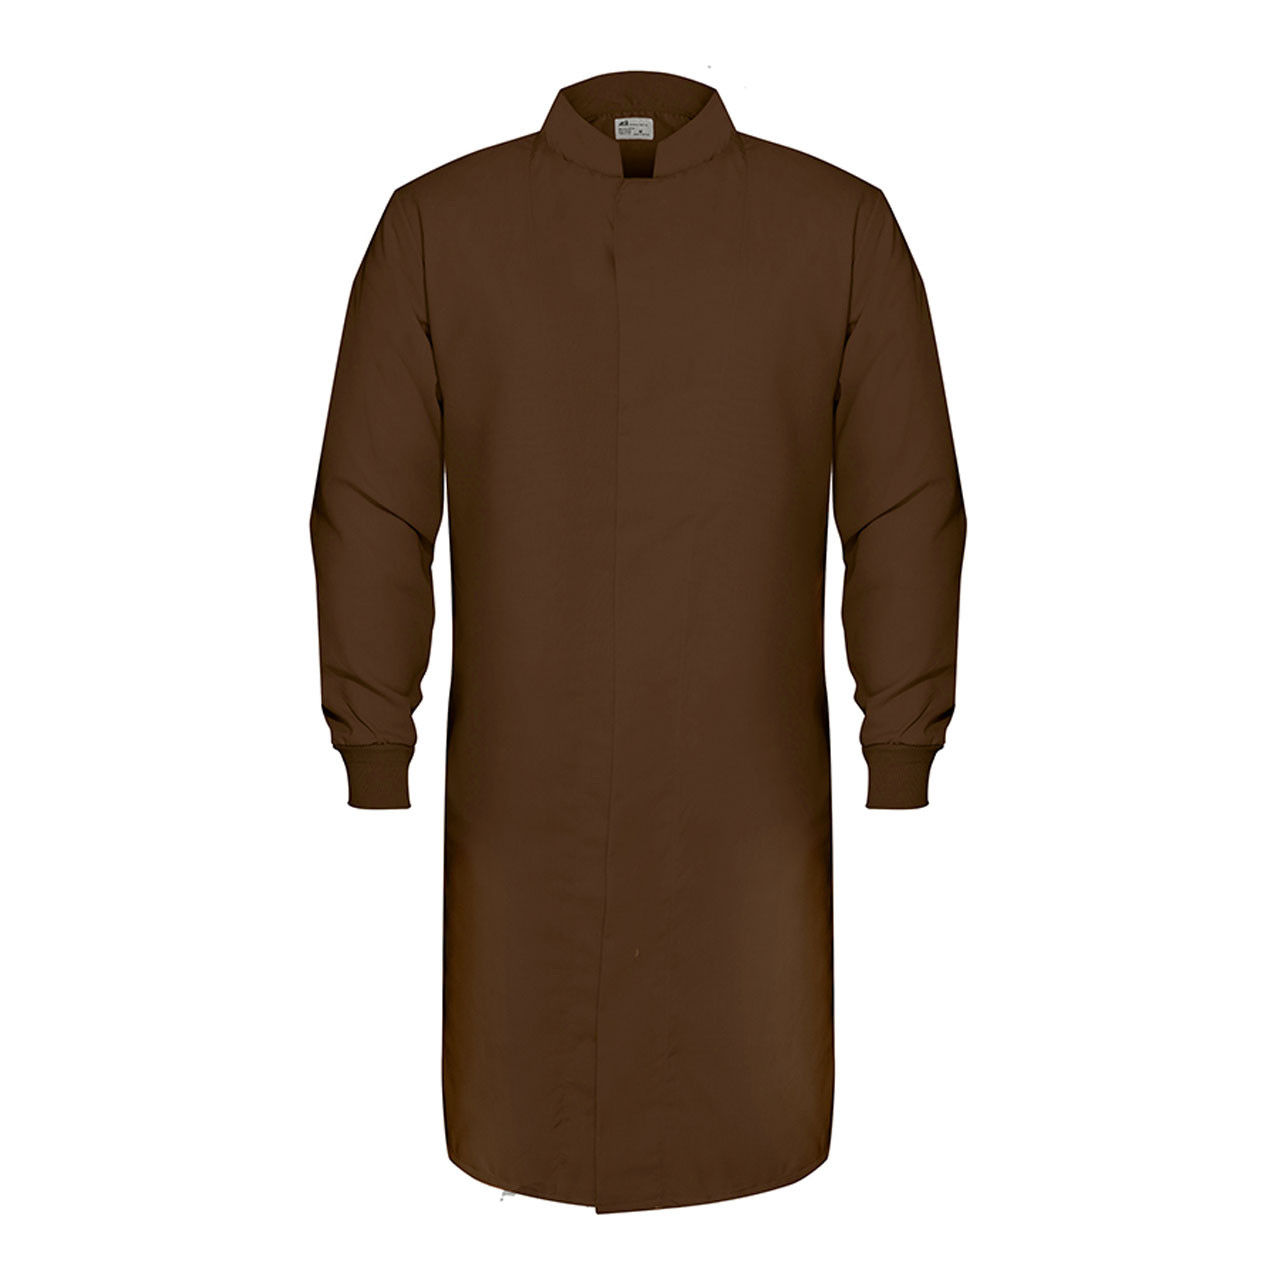 Is this brown lab coat heavier than an isolation gown?